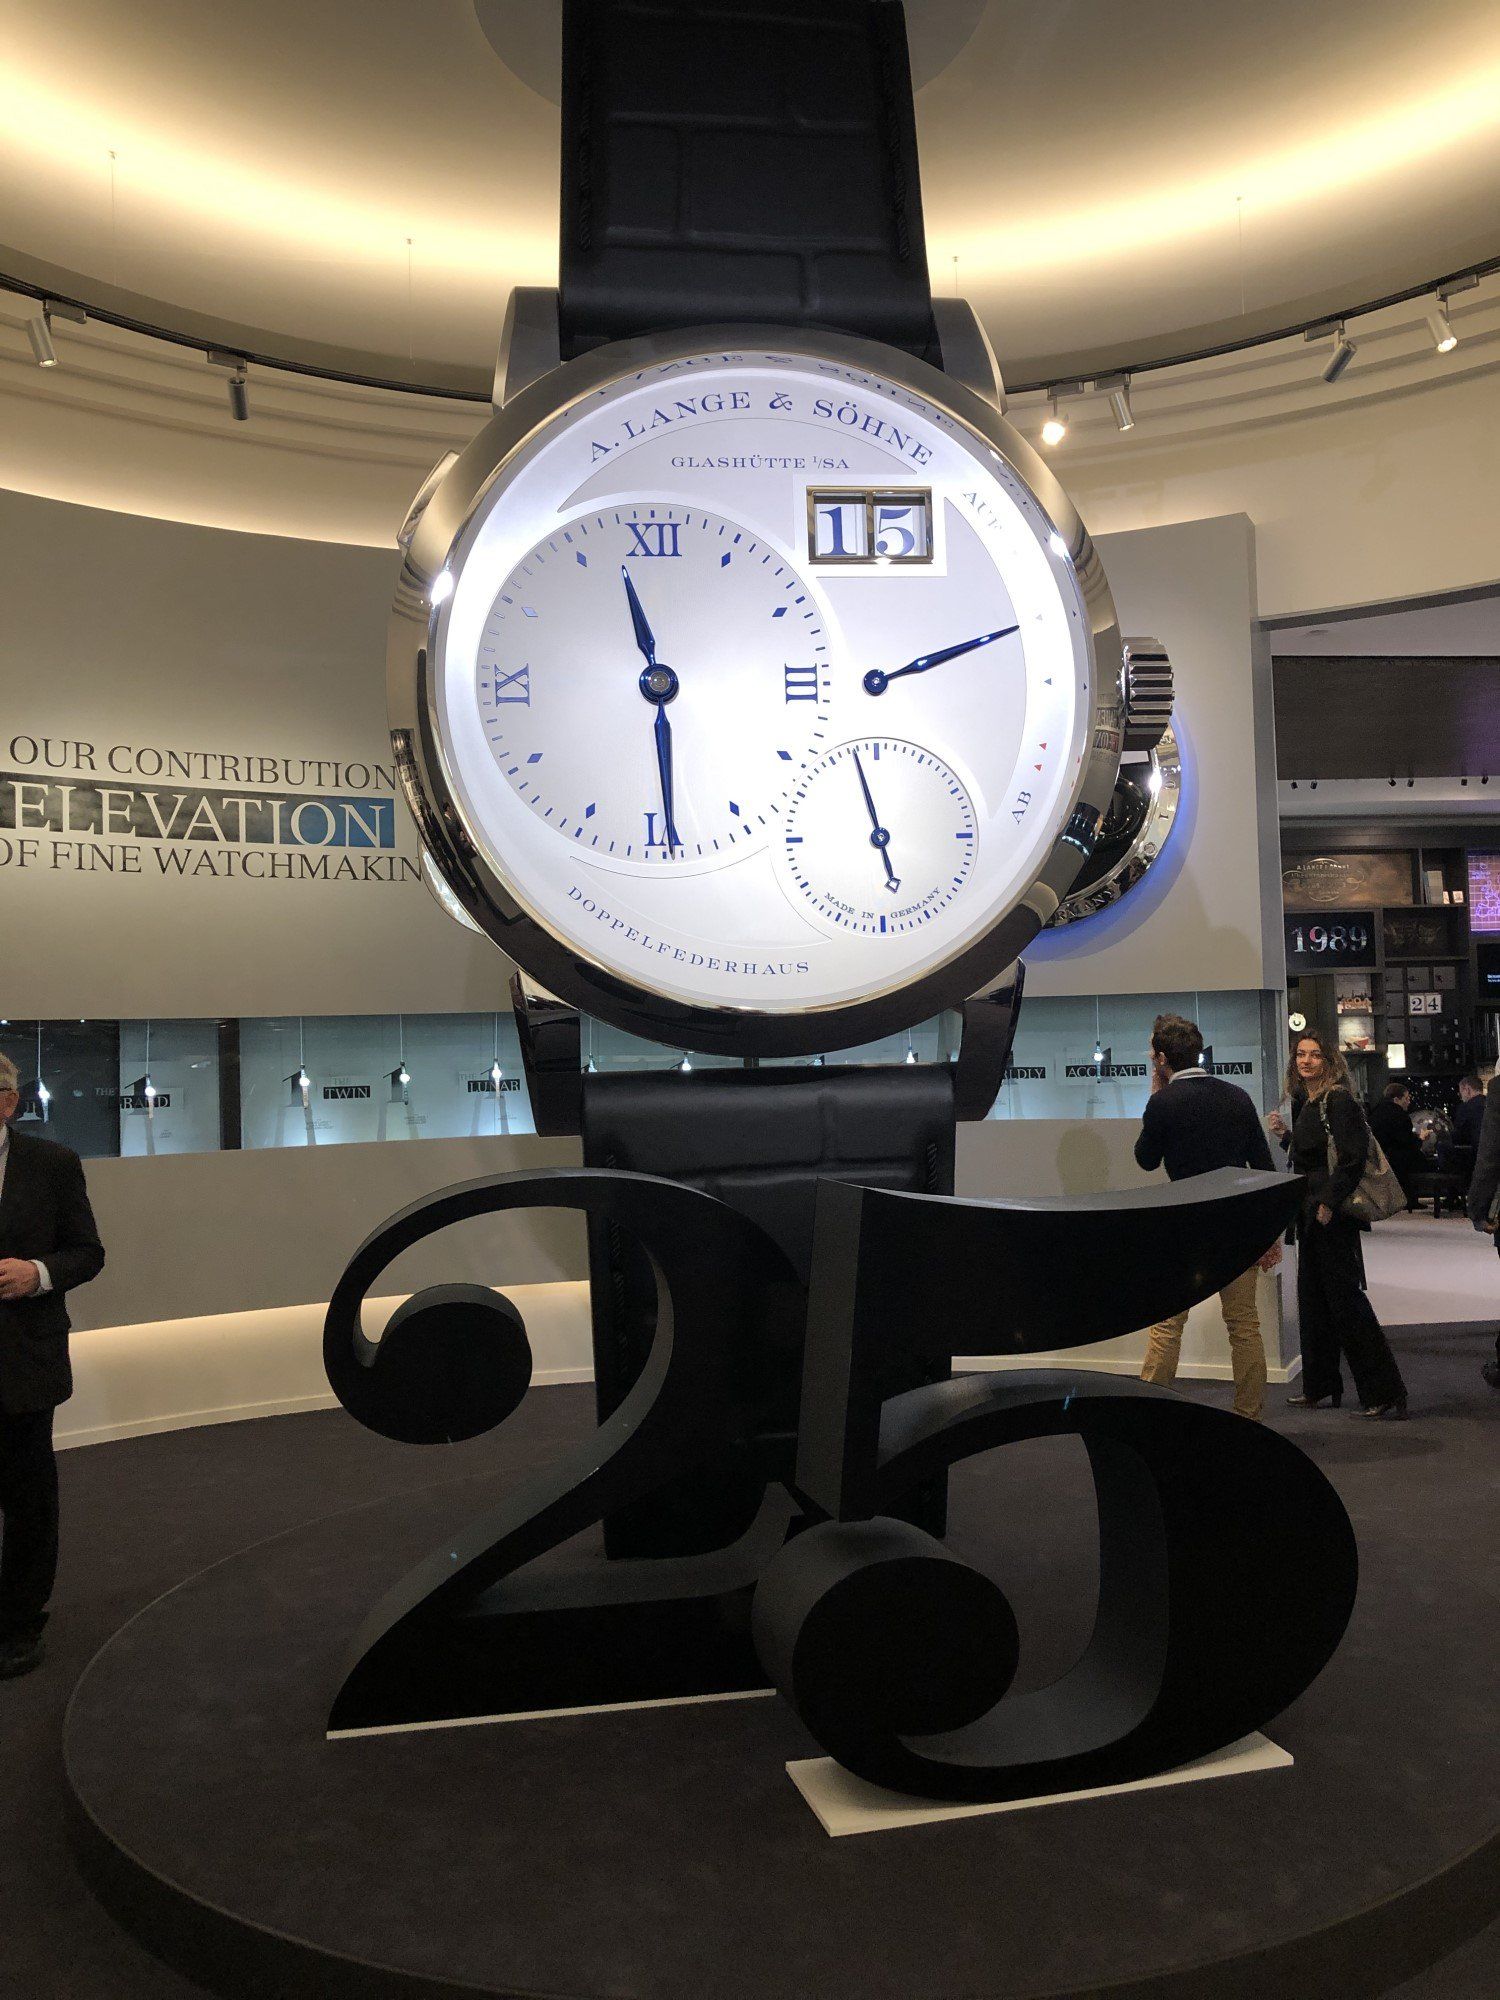 The A.Lange & Sohne booth at SIHH 2019